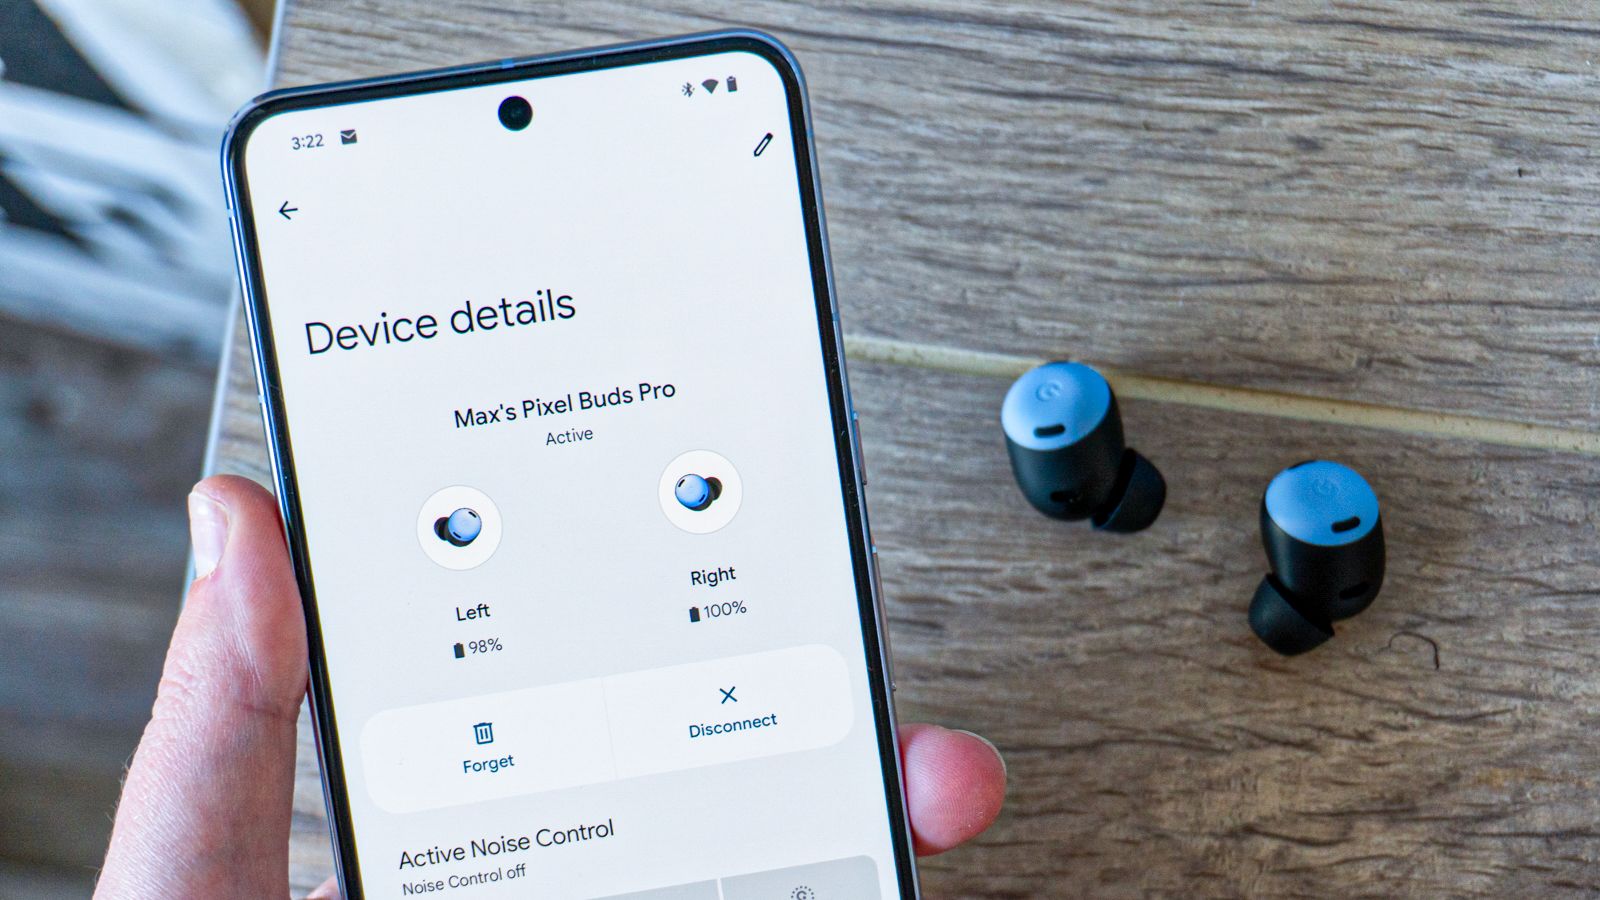 Google Pixel Buds Pro earbuds have active noise cancellation for